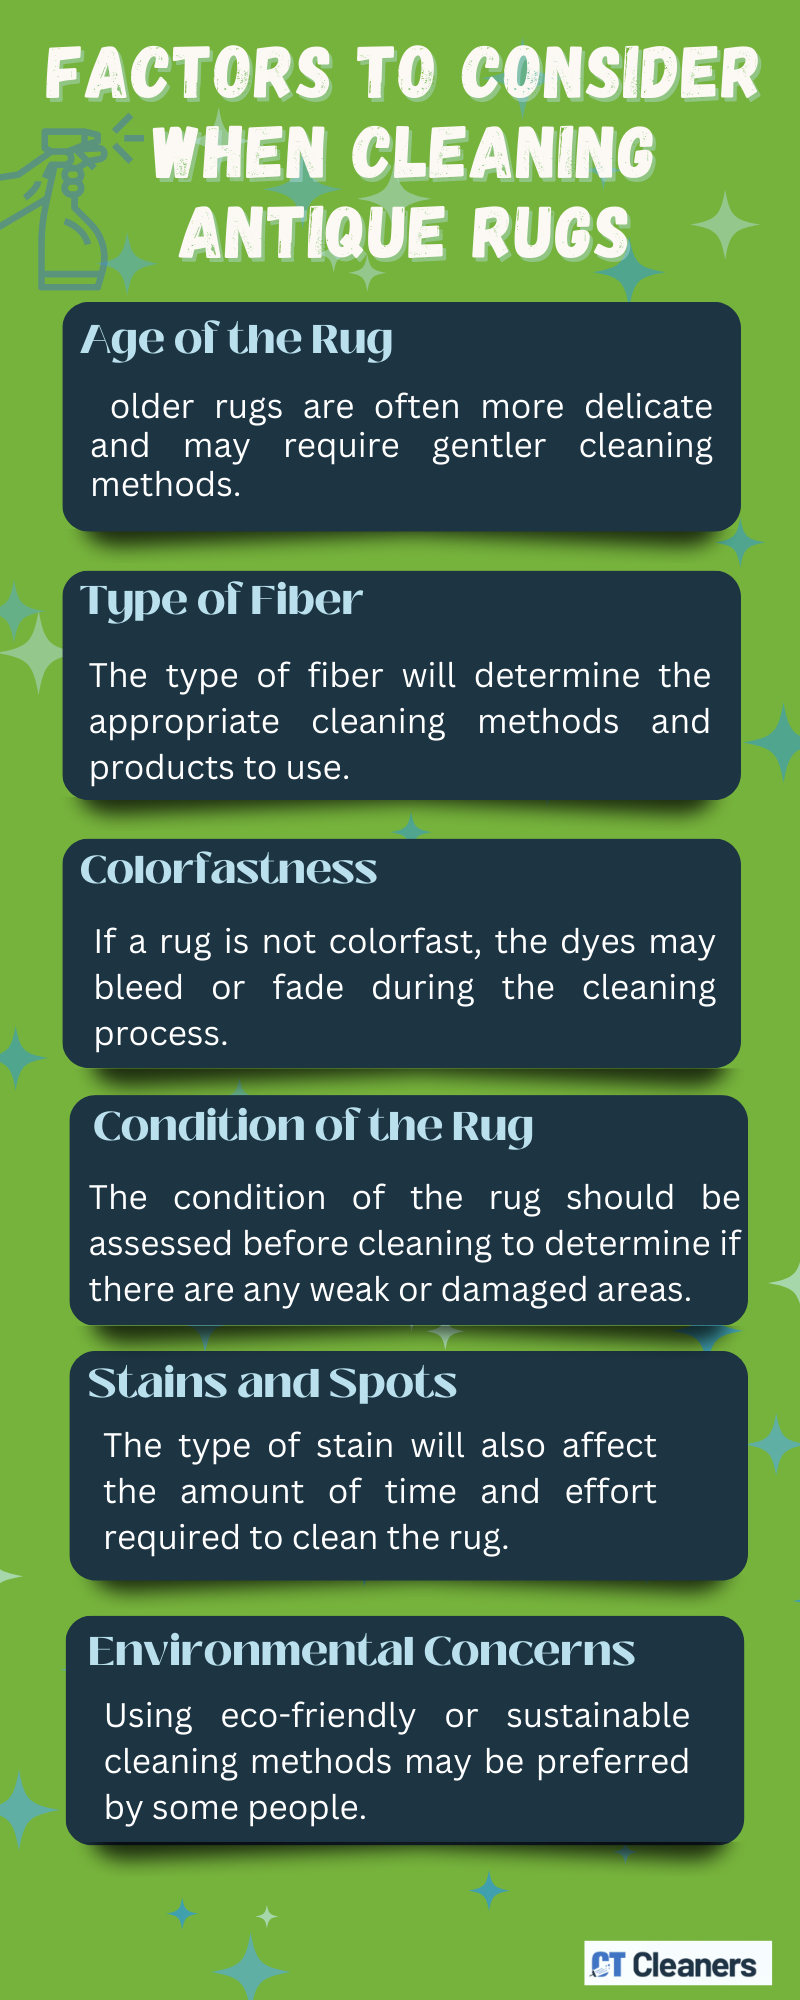 Factors to Consider When Cleaning Antique Rugs